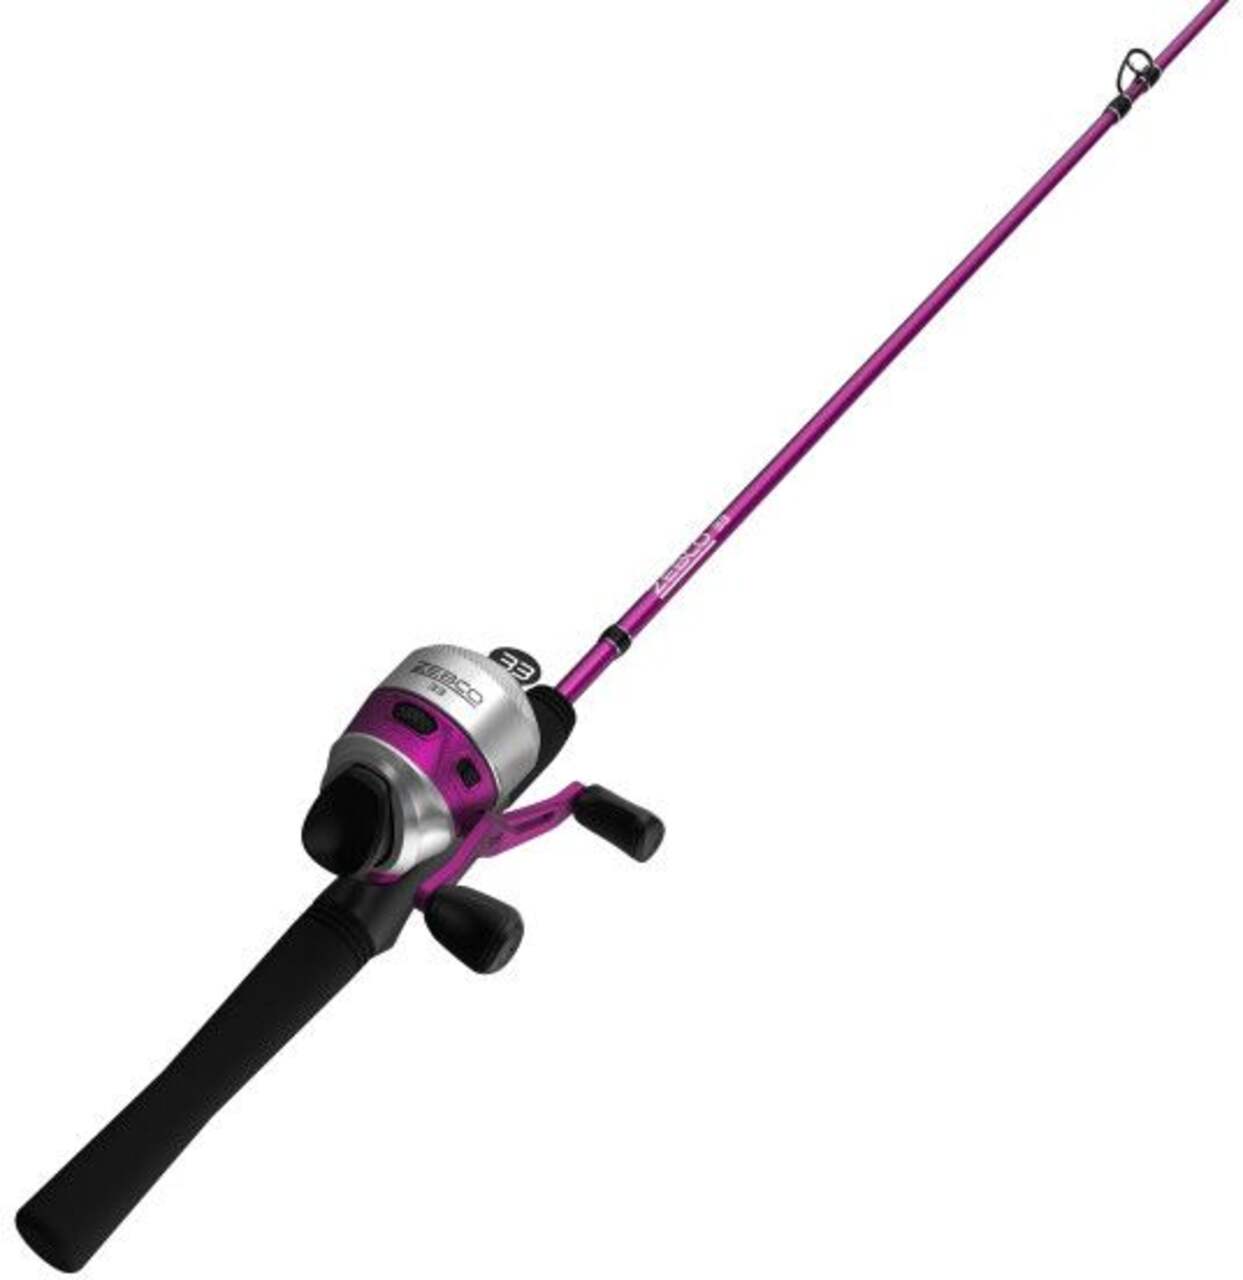 Zebco Casting Rod 6 ft 6 in Item Fishing Rods & Poles for sale